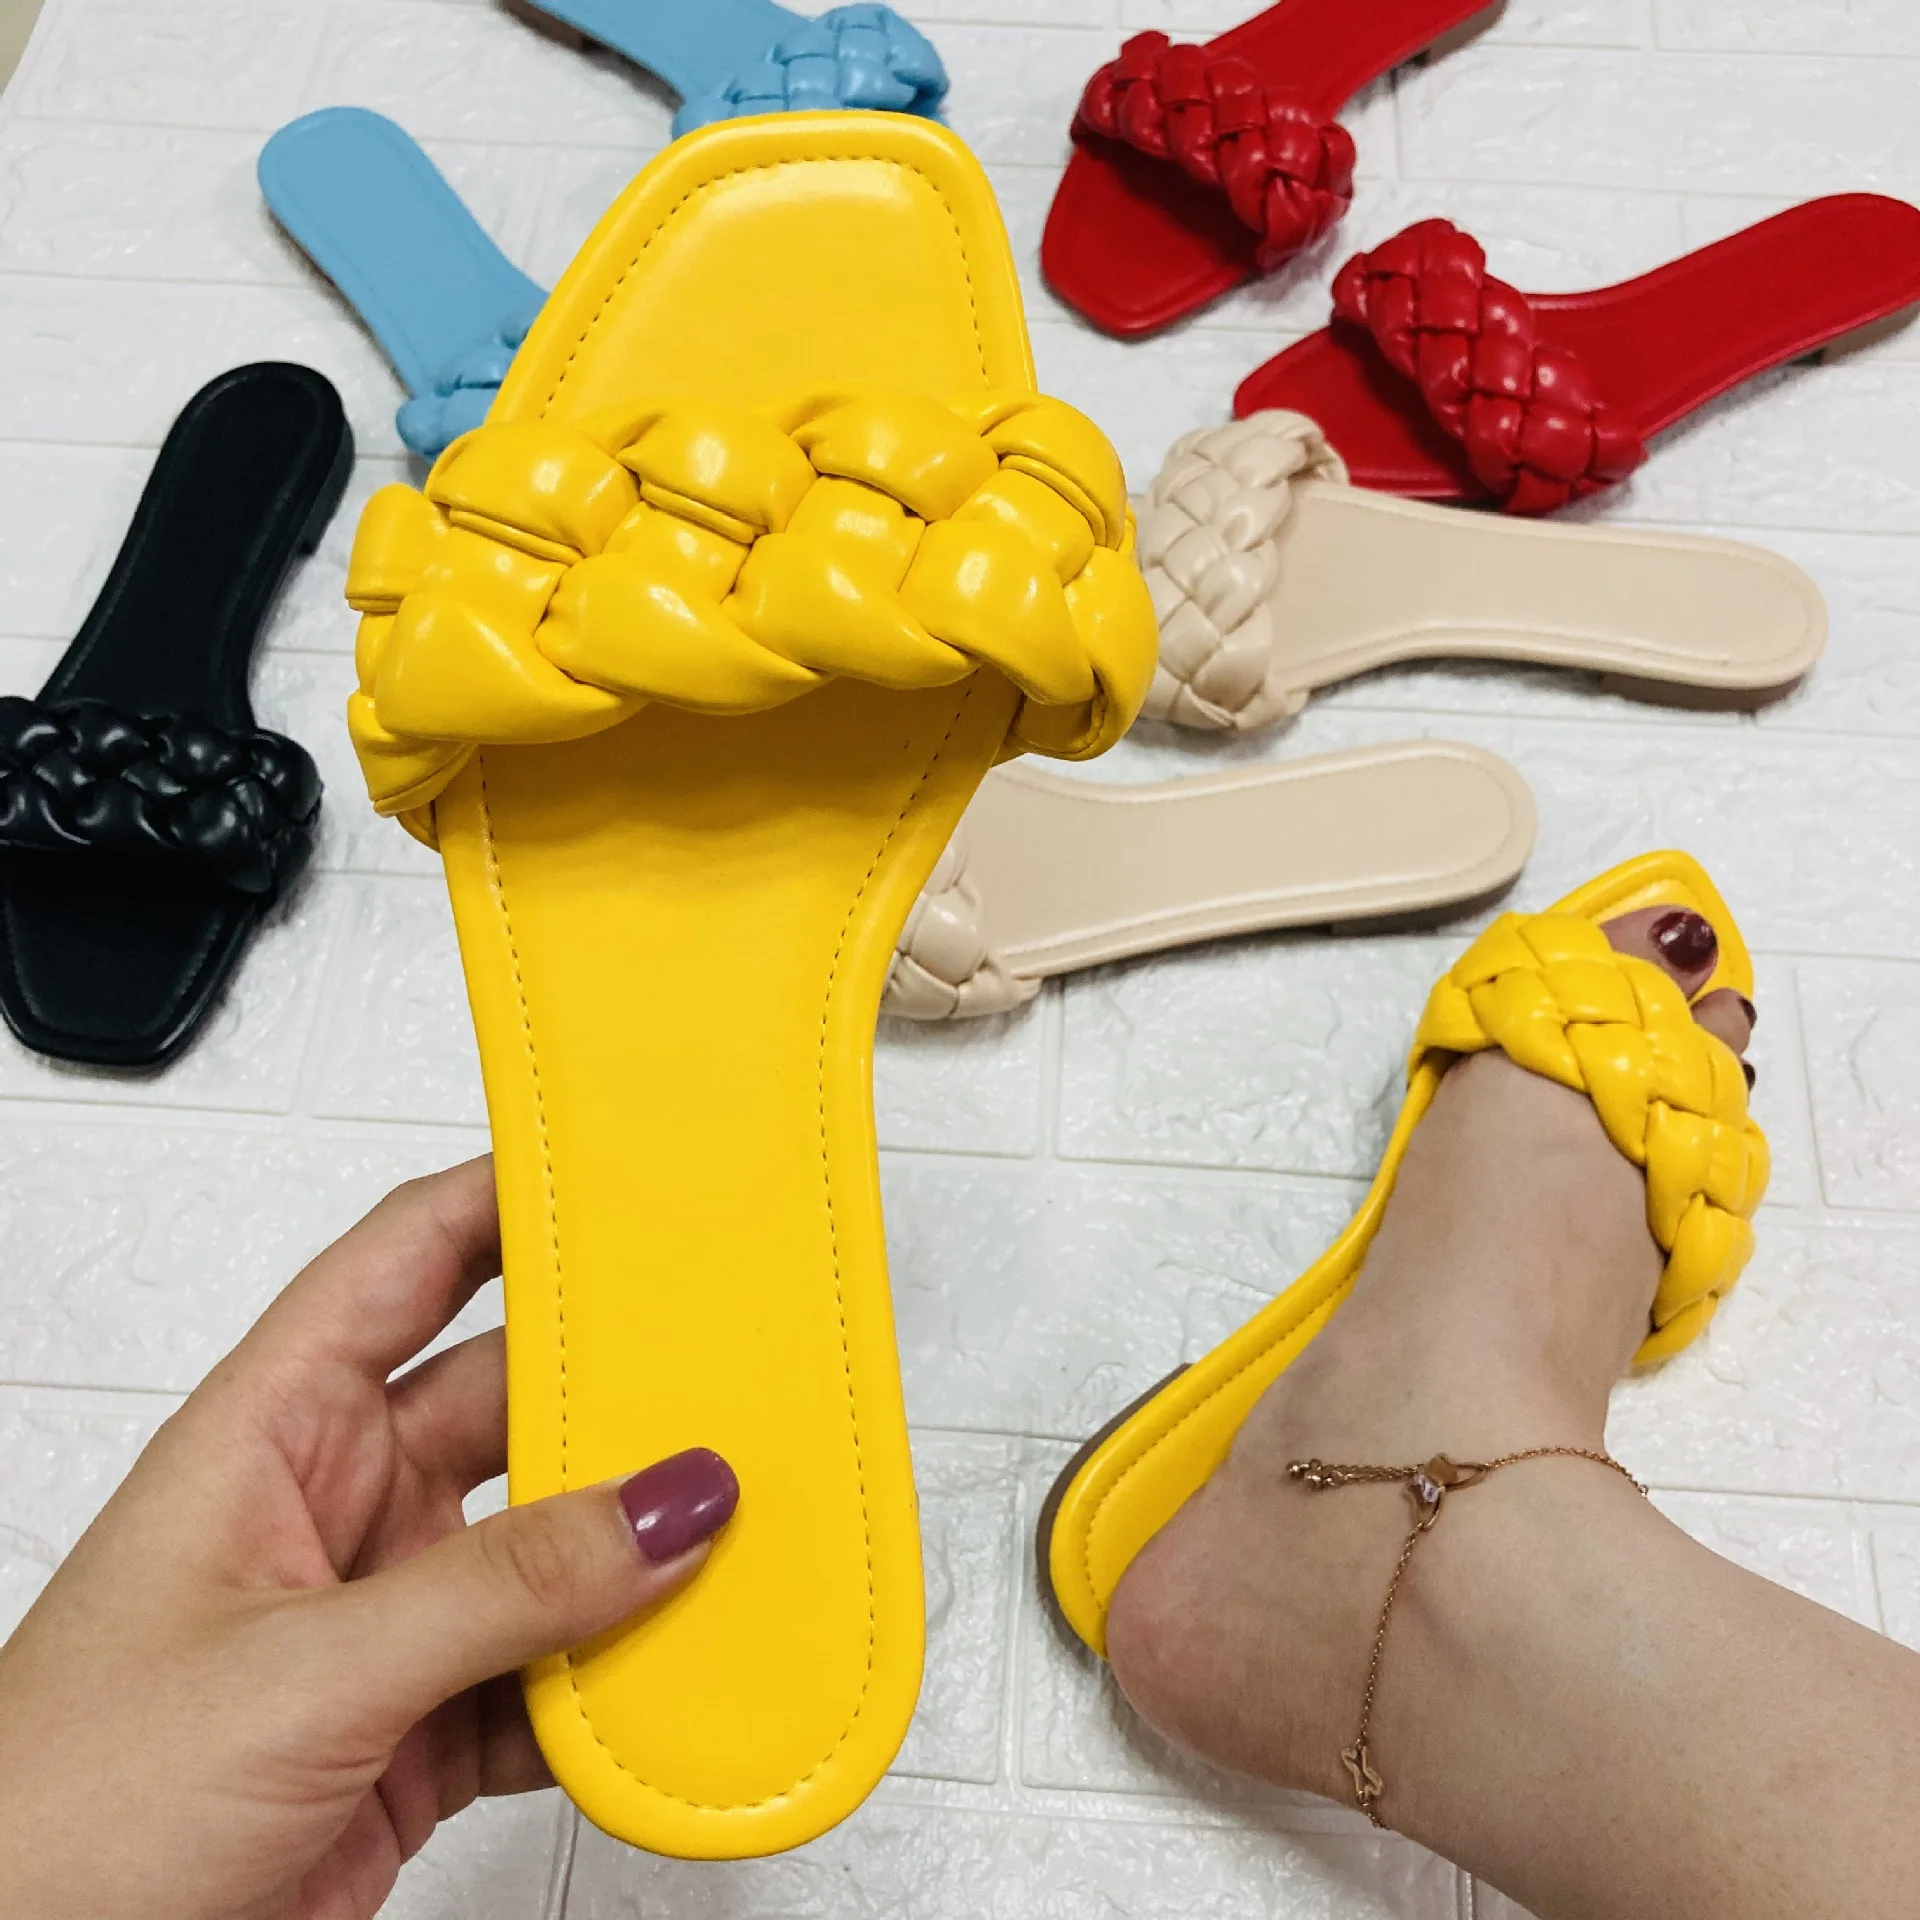 

2021 Summer Women's Flat Jelly Slide PU Footwear Slipper Colorful Casual Ladies Leather Sandal Outdoor New Fashion Wedge Shoes